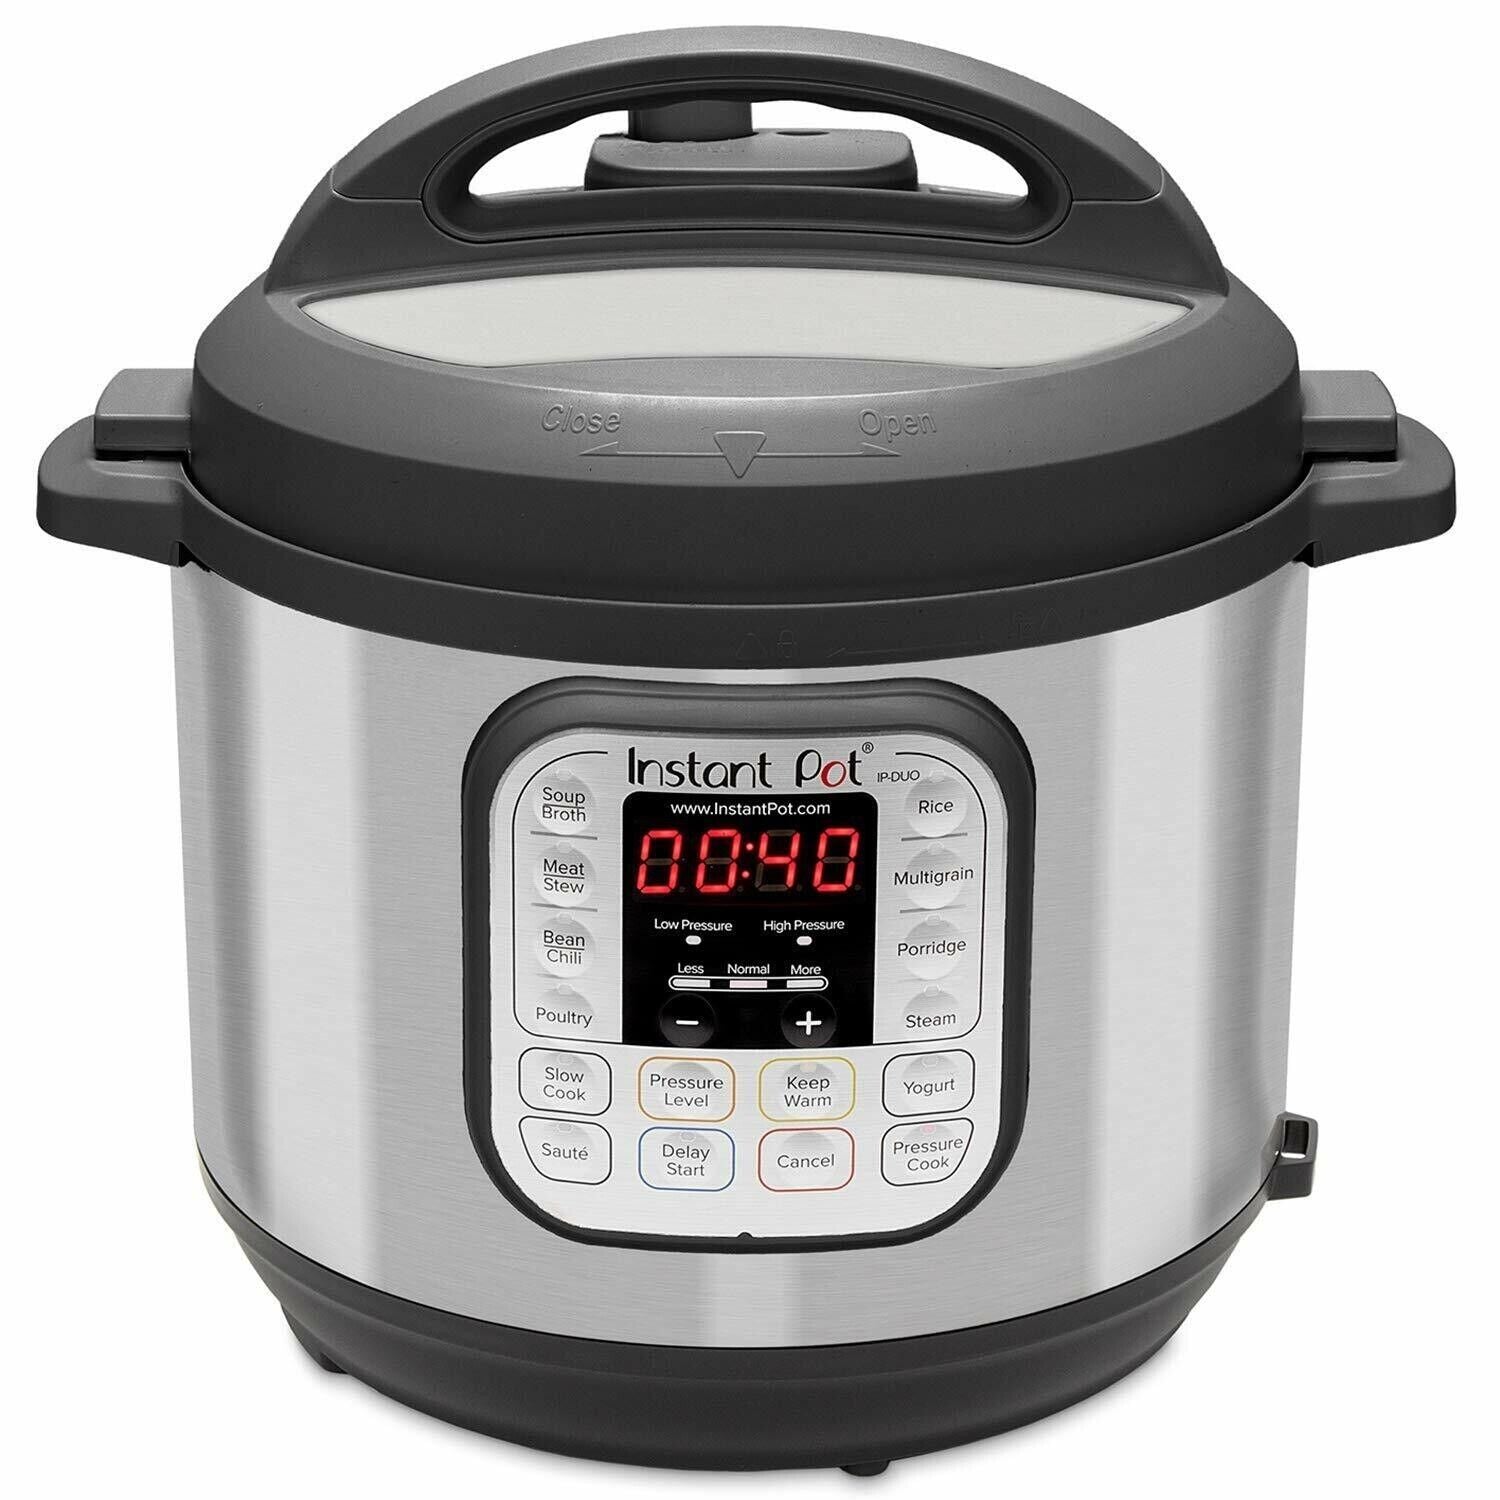 Instant Pot Duo 8 QT 7-in-1 Electric Pressure Cooker, Slow, Rice, Steam